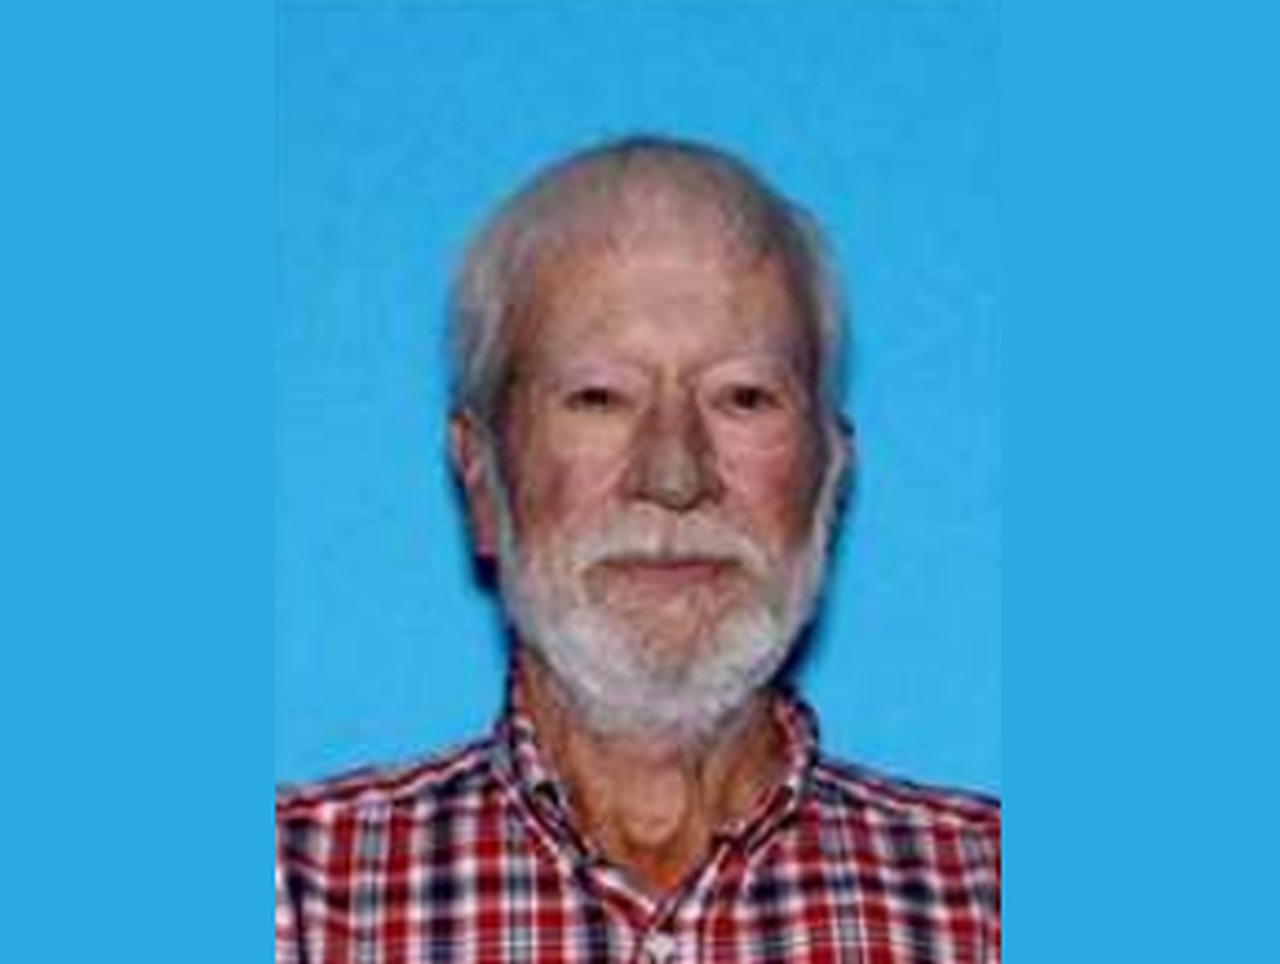 Alert issued for 78-year-old man who disappeared Tuesday morning from southeast Alabama